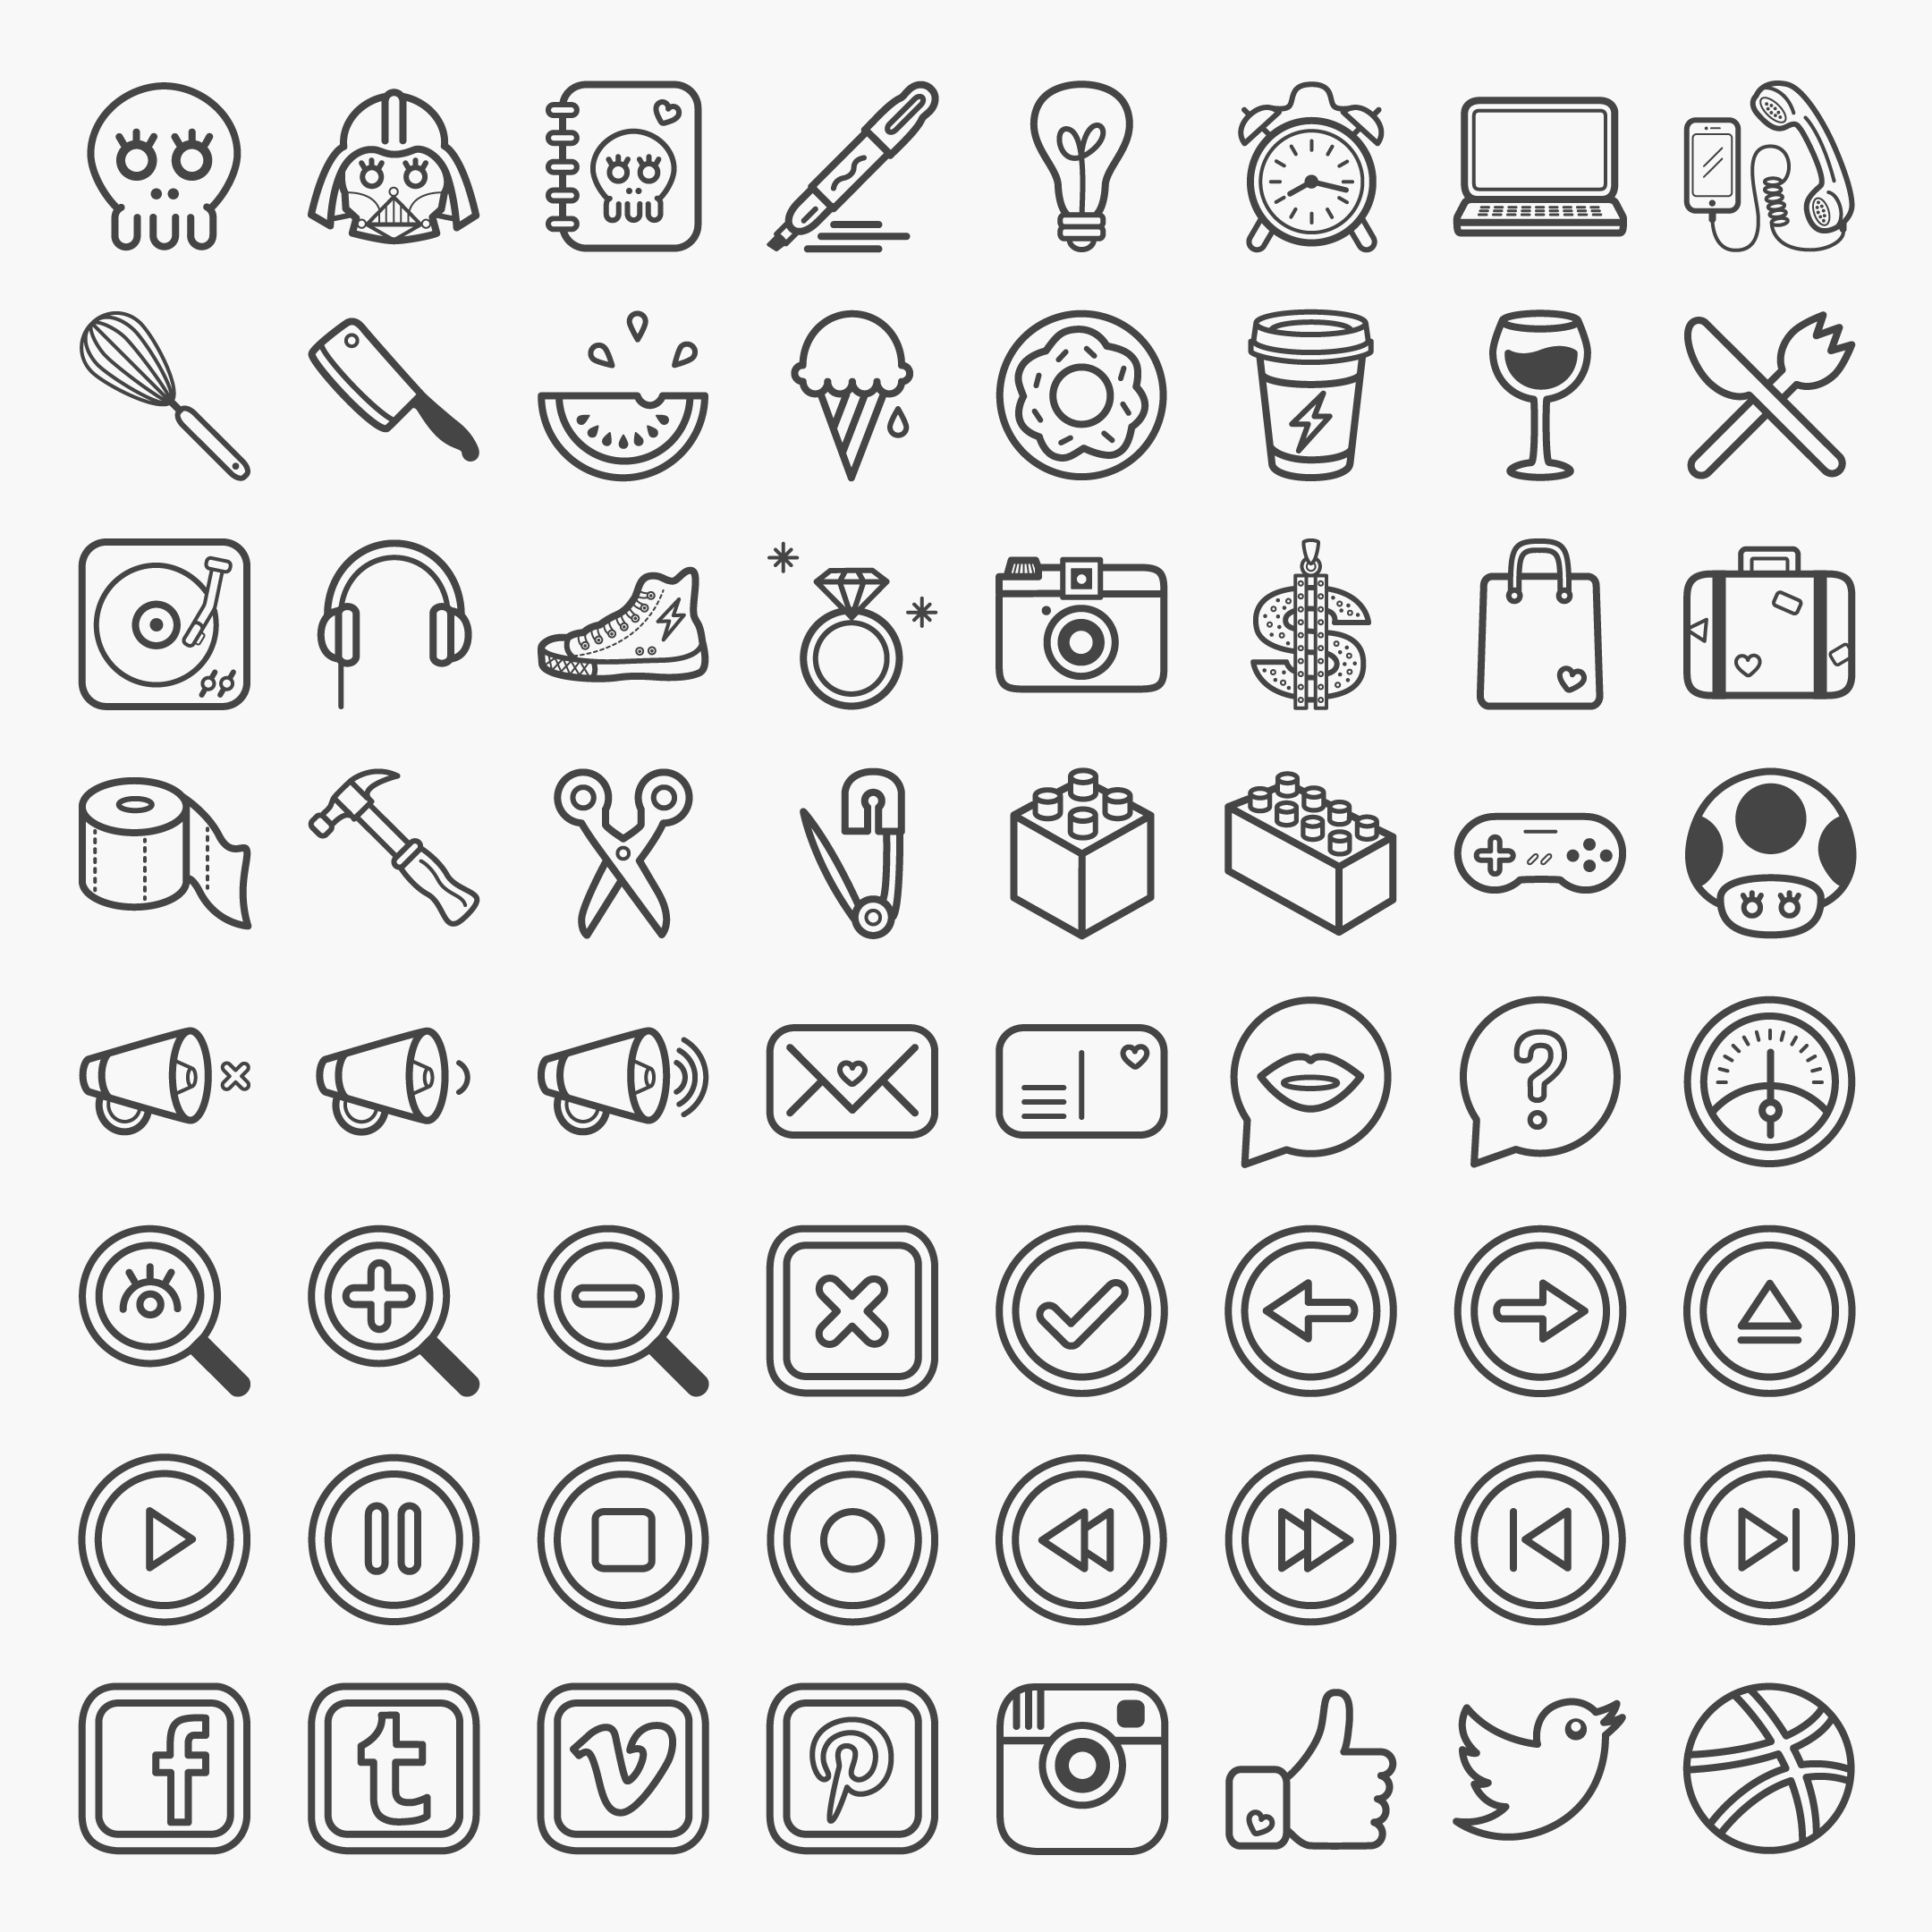 20 Newest Free Minimalist Icon Sets for Designers